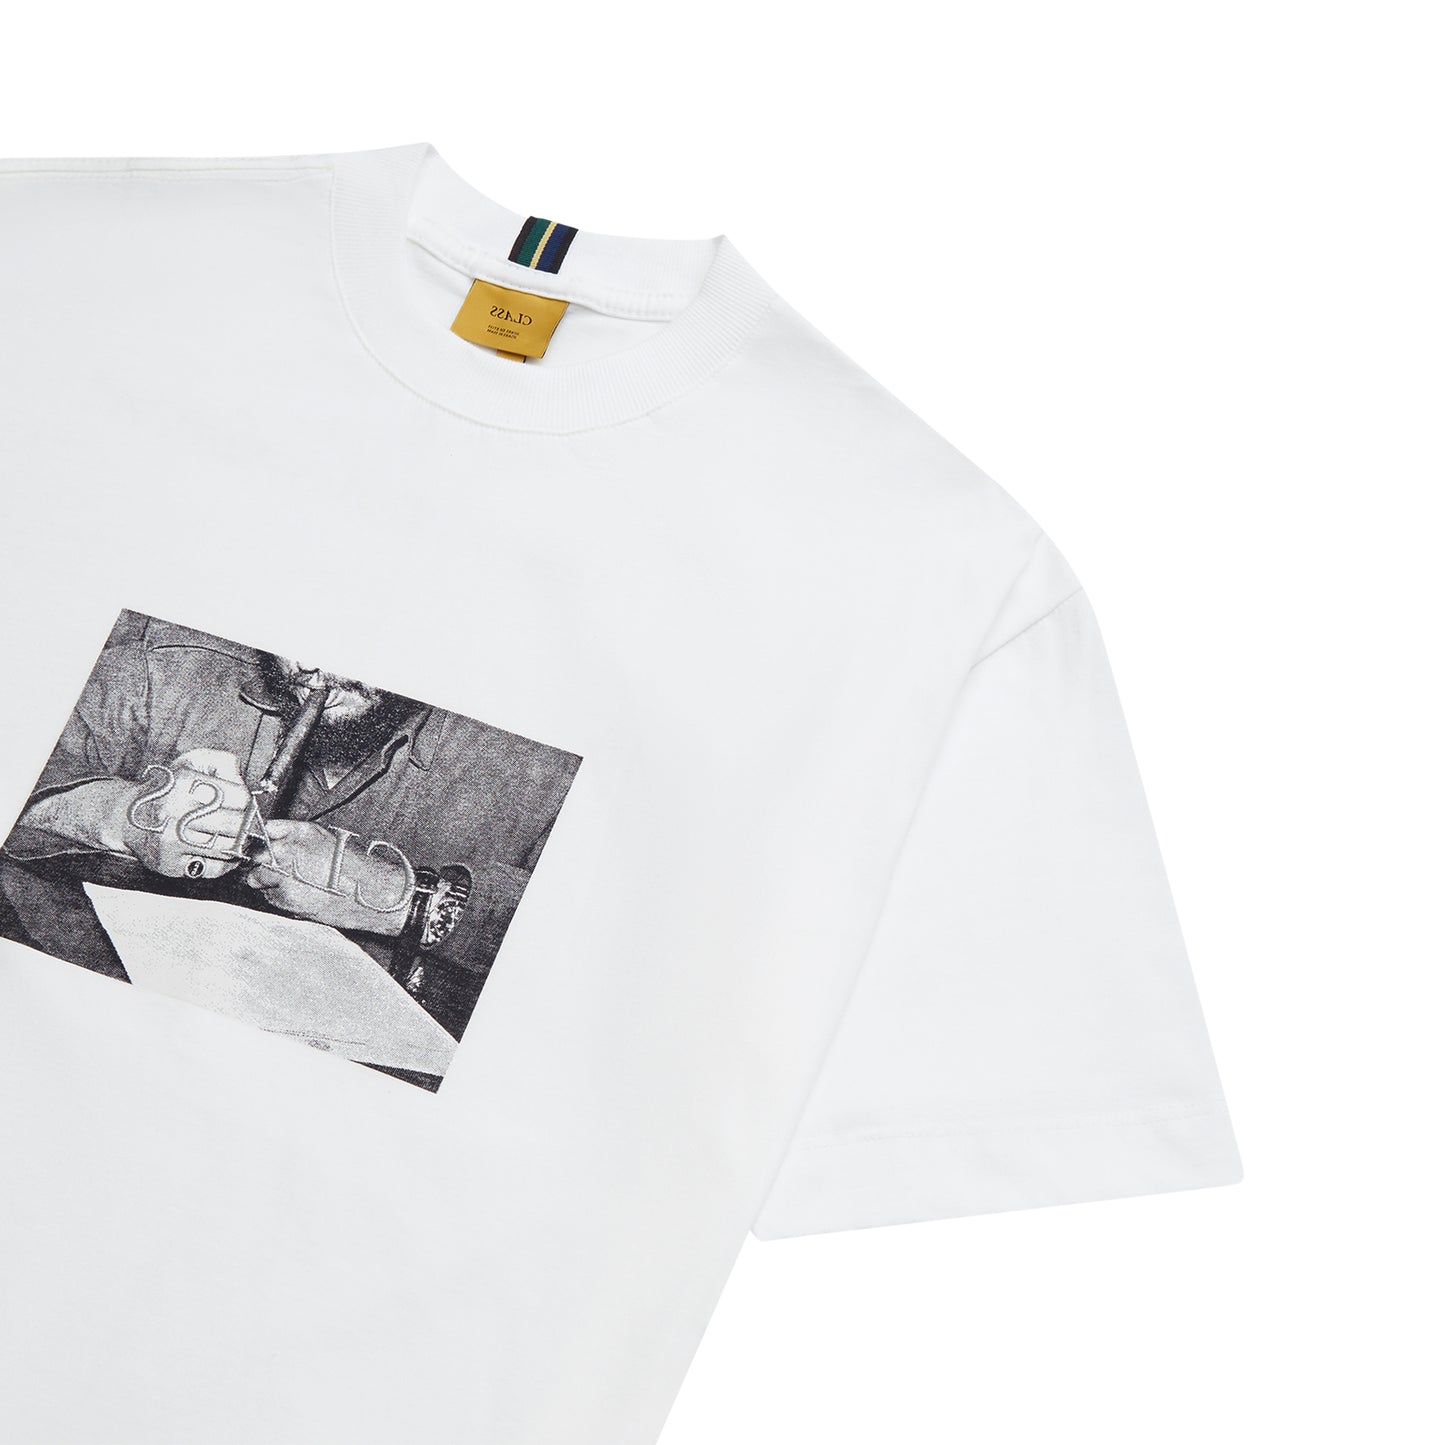 T-Shirt "A Time for Revolution" Off-White